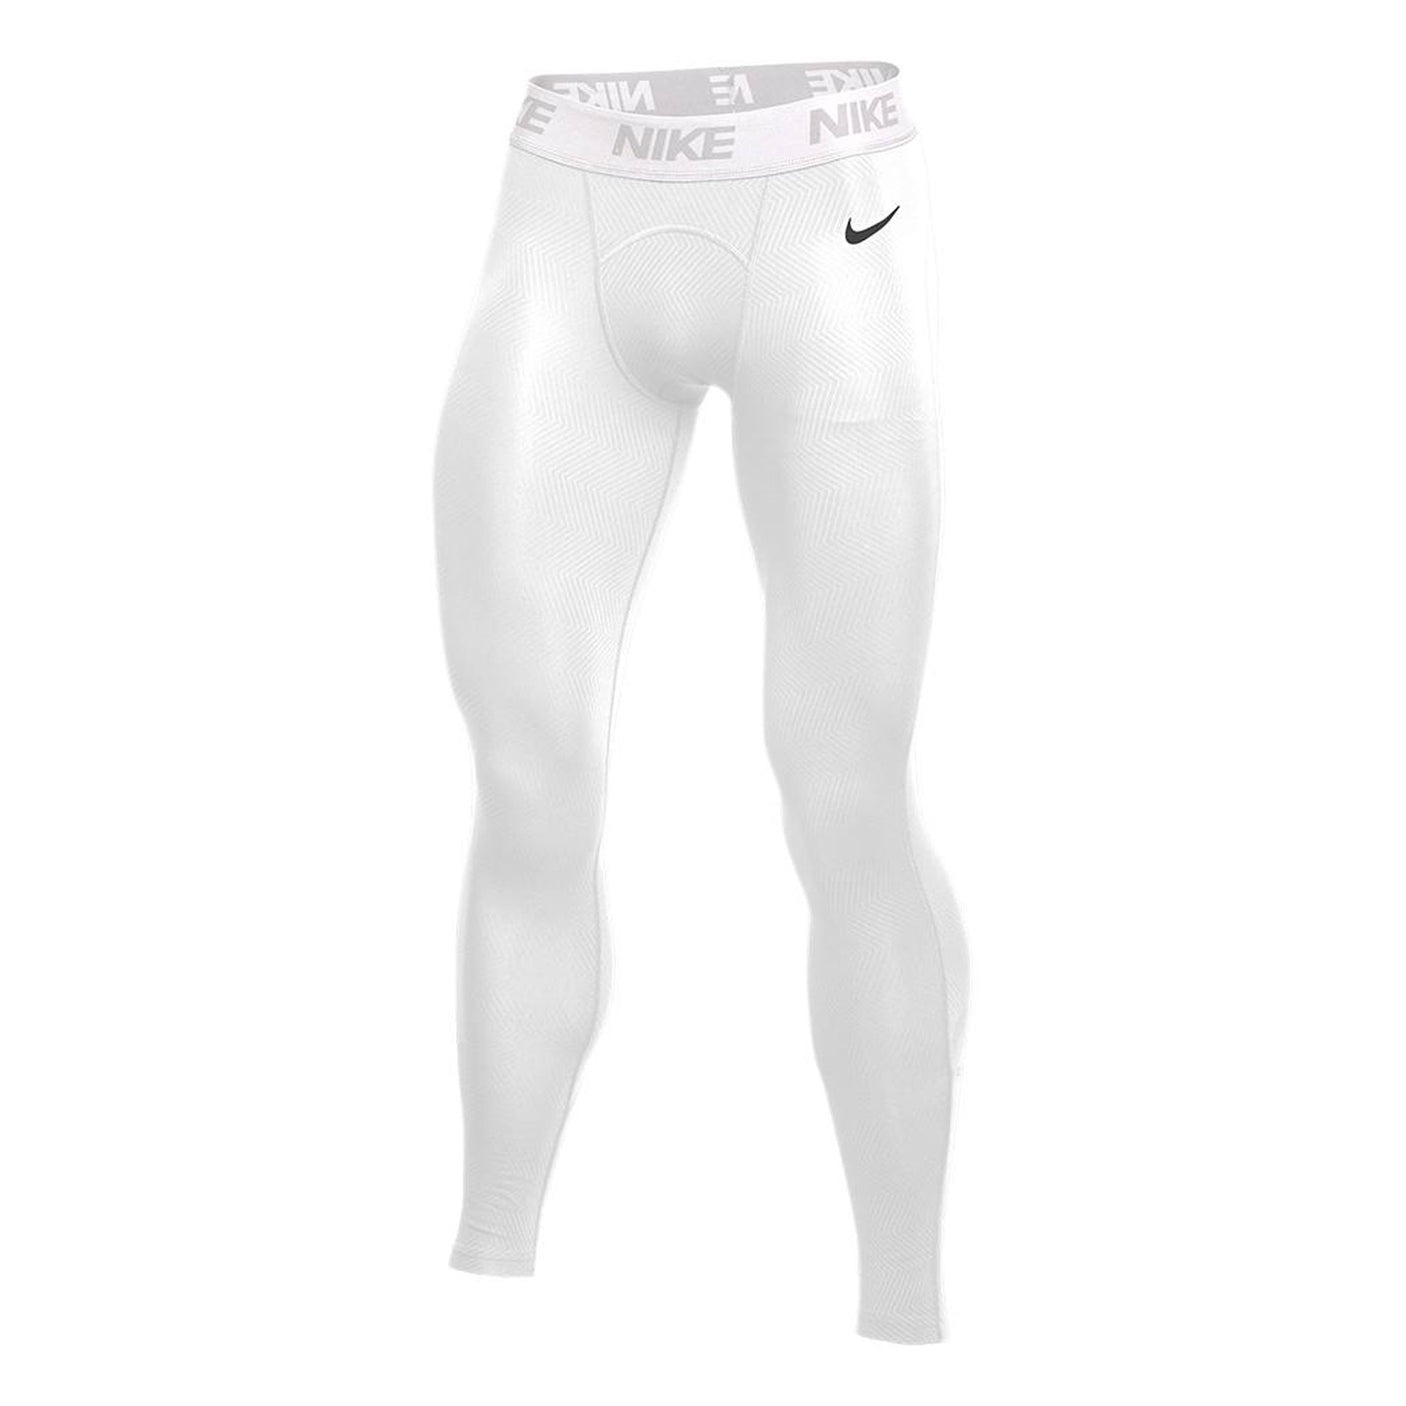 FG Pro On-Field Compression Pants - Adult Female